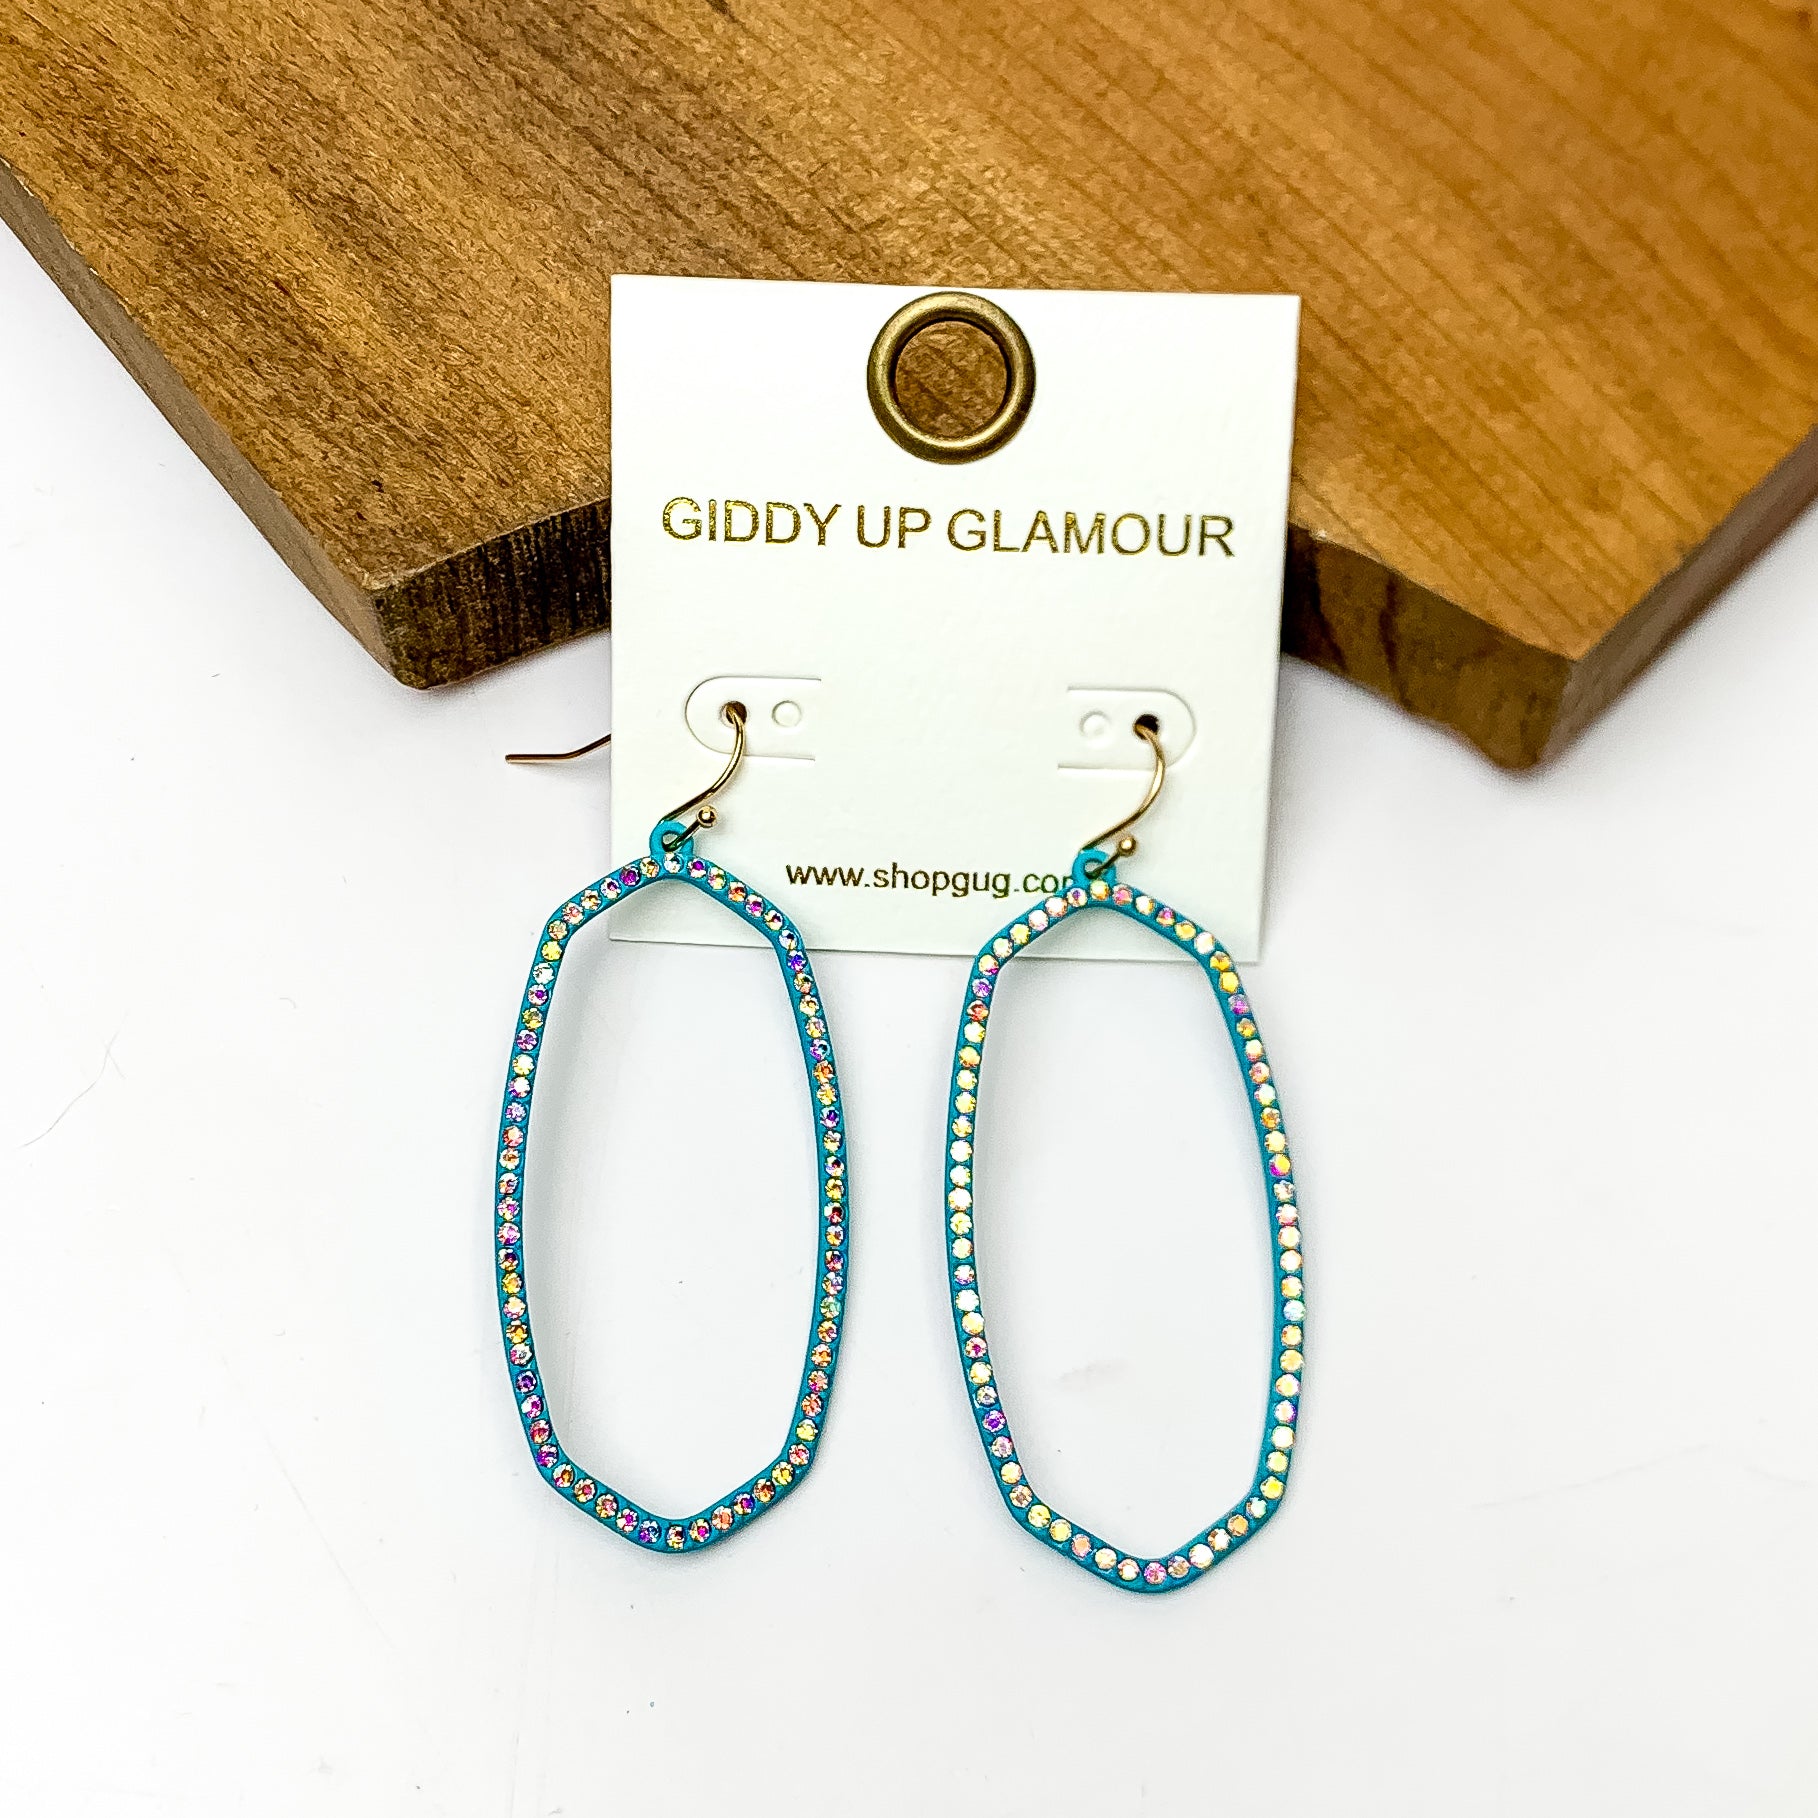 Sparkle Girl Open Oval Earrings in Turquoise Blue. These earrings are pictured laying against a wood piece with a white background.